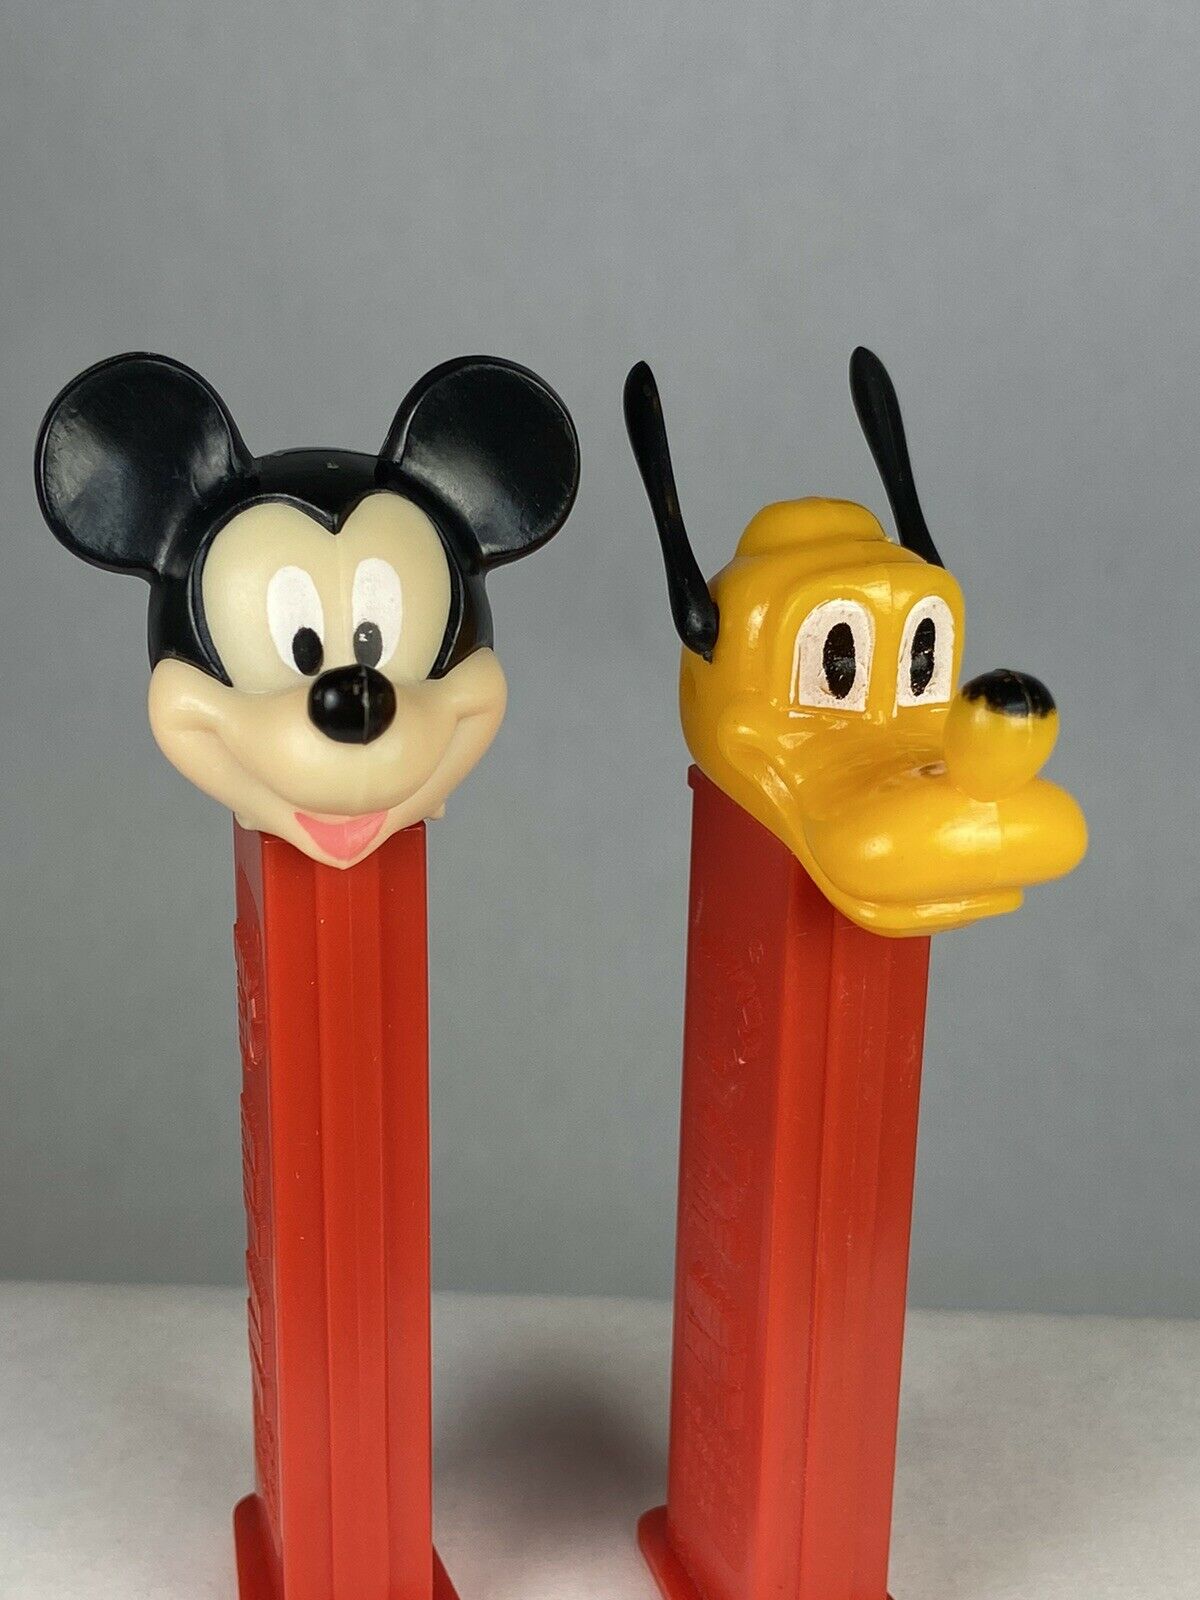 Disney Pluto Moveable Ears & Mickey Mouse Both 4.9 Hungary Stems Pez Dispensers